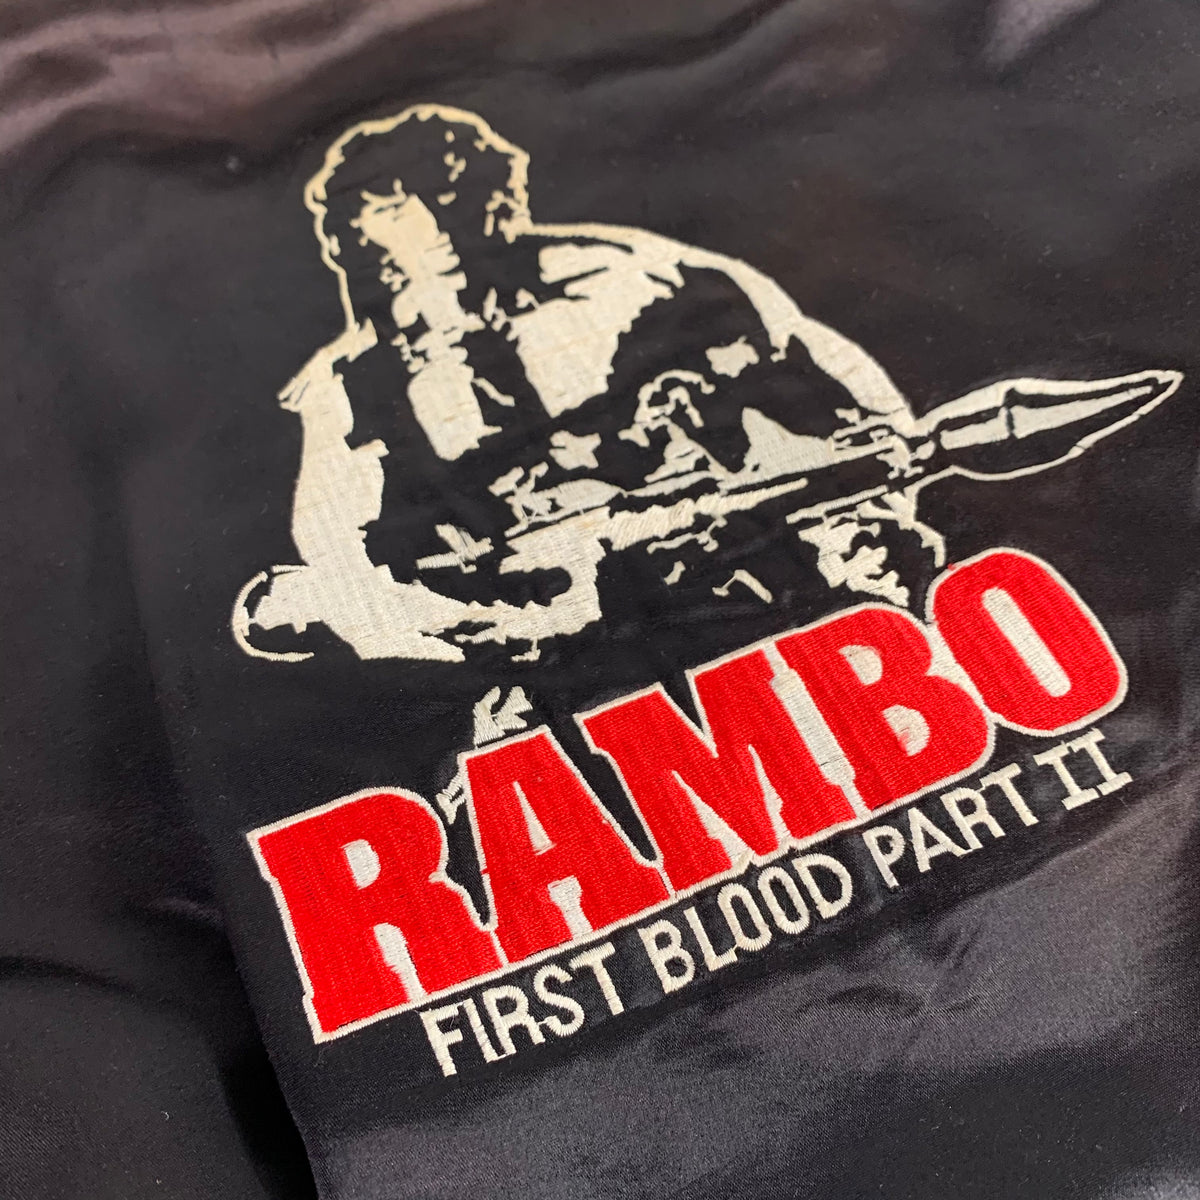 Vintage Rambo &quot;First Blood Part II&quot; Thorn Emi HBO Video Promotional Satin Jacket